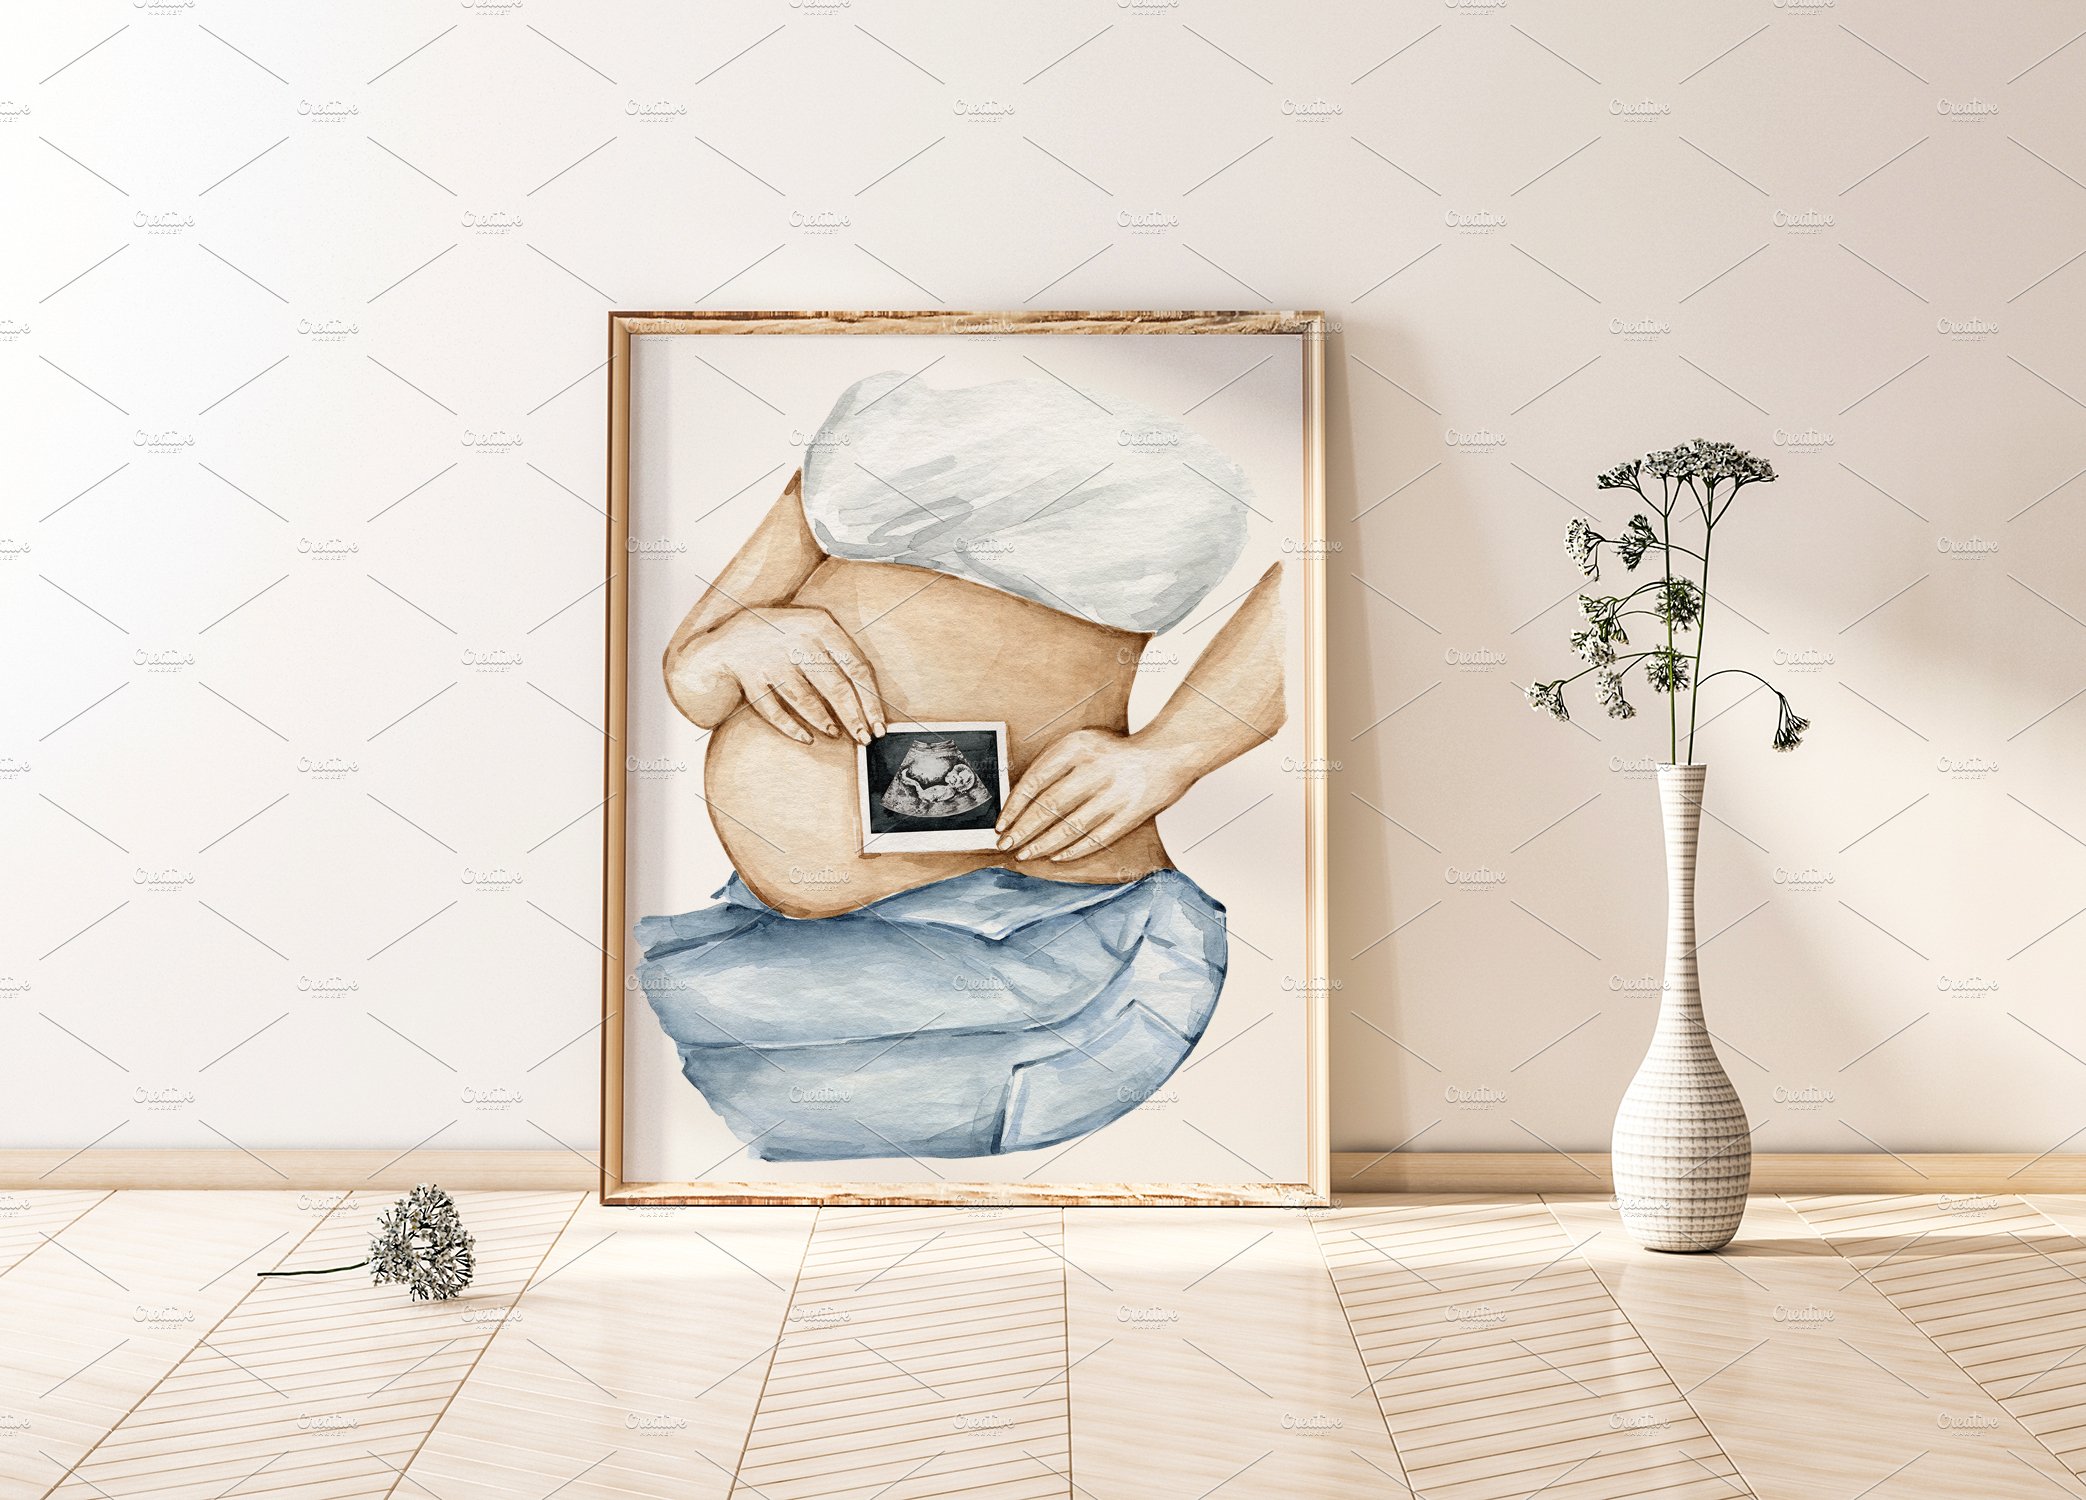 Pregnancy New Mom & Ultrasound Scan cover image.